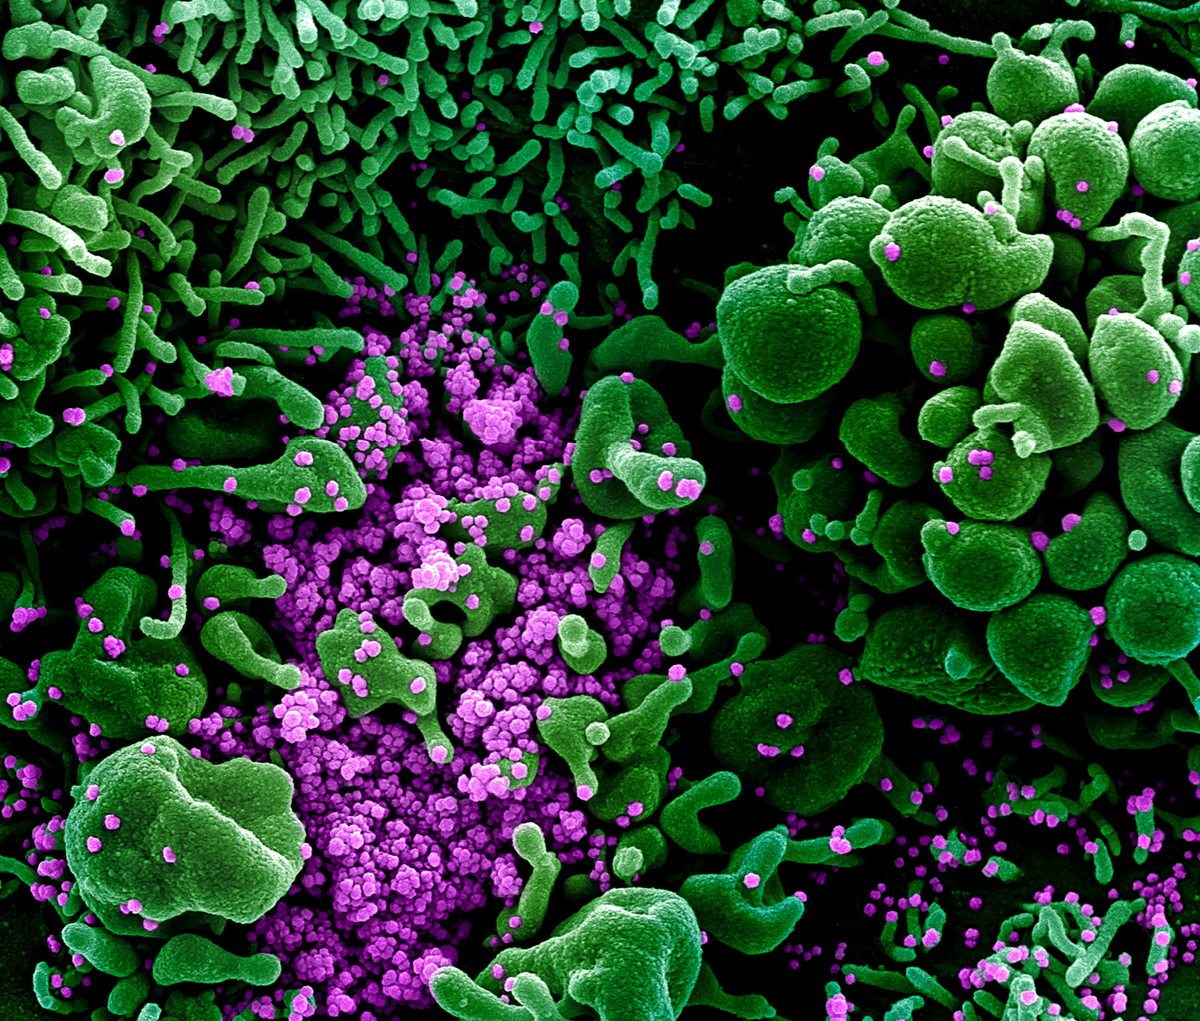 A cell (green) heavily infected with COVID-19 virus particles (purple), isolated from a patient sample. The cell is undergoing programmed cell death. Colorized SEM image. Credit: National Institute of Allergy and Infectious Diseases, NIH